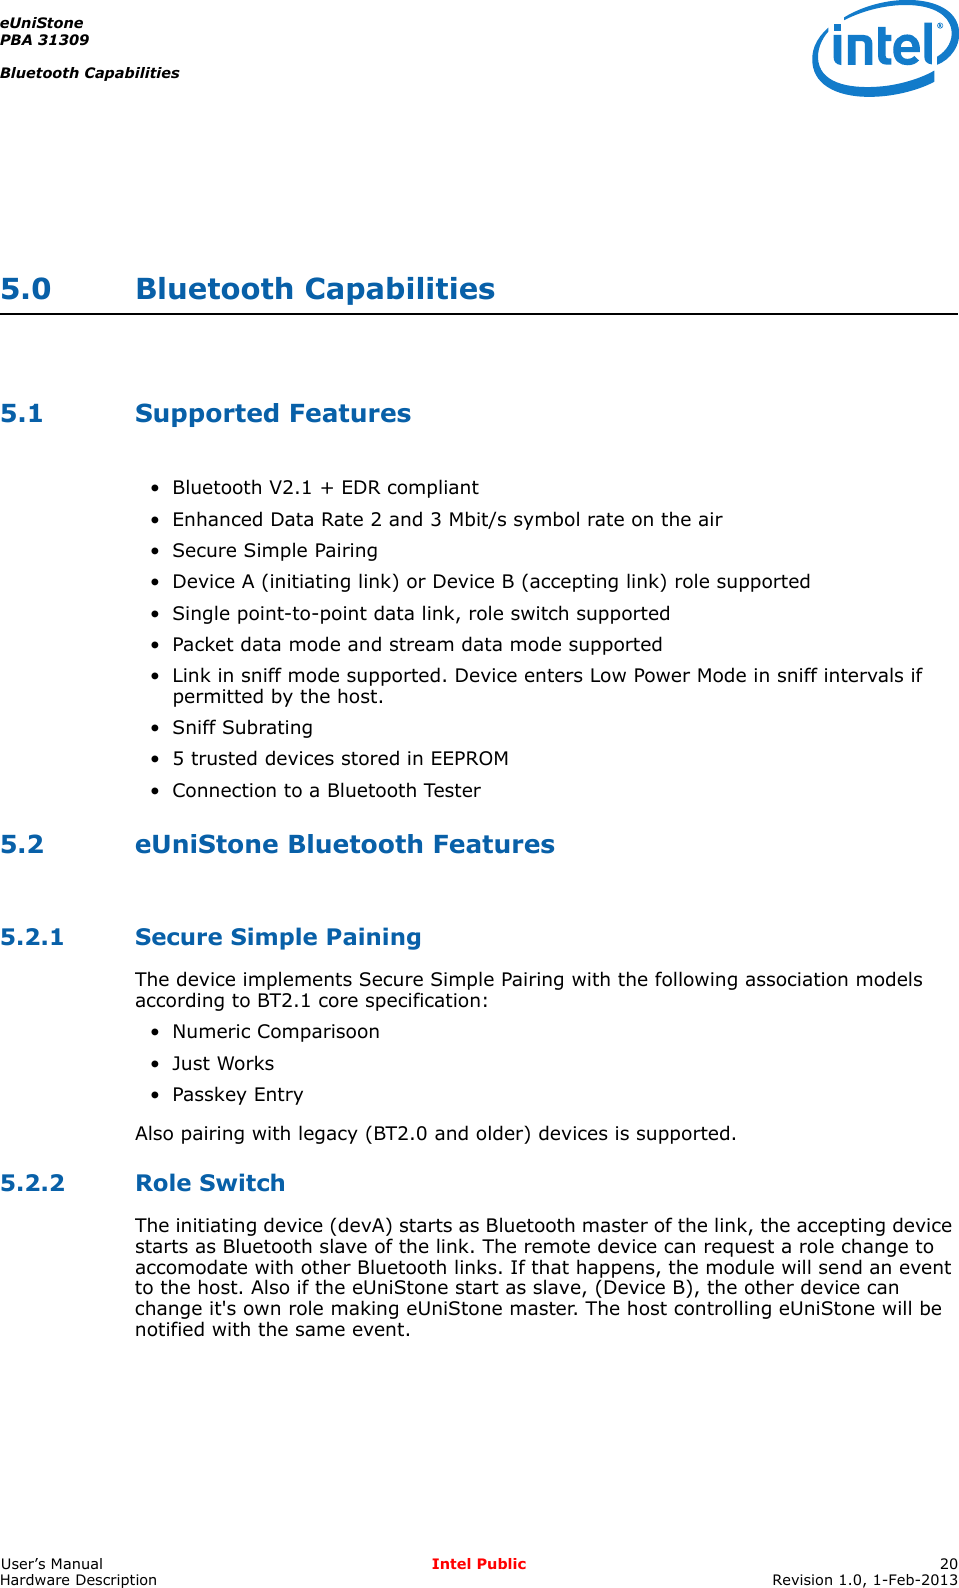 eUniStonePBA 31309Bluetooth CapabilitiesUser’s Manual Intel Public 20Hardware Description Revision 1.0, 1-Feb-20135.0 Bluetooth Capabilities5.1 Supported Features• Bluetooth V2.1 + EDR compliant• Enhanced Data Rate 2 and 3 Mbit/s symbol rate on the air• Secure Simple Pairing• Device A (initiating link) or Device B (accepting link) role supported• Single point-to-point data link, role switch supported• Packet data mode and stream data mode supported• Link in sniff mode supported. Device enters Low Power Mode in sniff intervals if permitted by the host.• Sniff Subrating• 5 trusted devices stored in EEPROM• Connection to a Bluetooth Tester5.2 eUniStone Bluetooth Features5.2.1 Secure Simple PainingThe device implements Secure Simple Pairing with the following association models according to BT2.1 core specification:• Numeric Comparisoon•Just Works• Passkey EntryAlso pairing with legacy (BT2.0 and older) devices is supported.5.2.2 Role SwitchThe initiating device (devA) starts as Bluetooth master of the link, the accepting device starts as Bluetooth slave of the link. The remote device can request a role change to accomodate with other Bluetooth links. If that happens, the module will send an event to the host. Also if the eUniStone start as slave, (Device B), the other device can change it&apos;s own role making eUniStone master. The host controlling eUniStone will be notified with the same event.